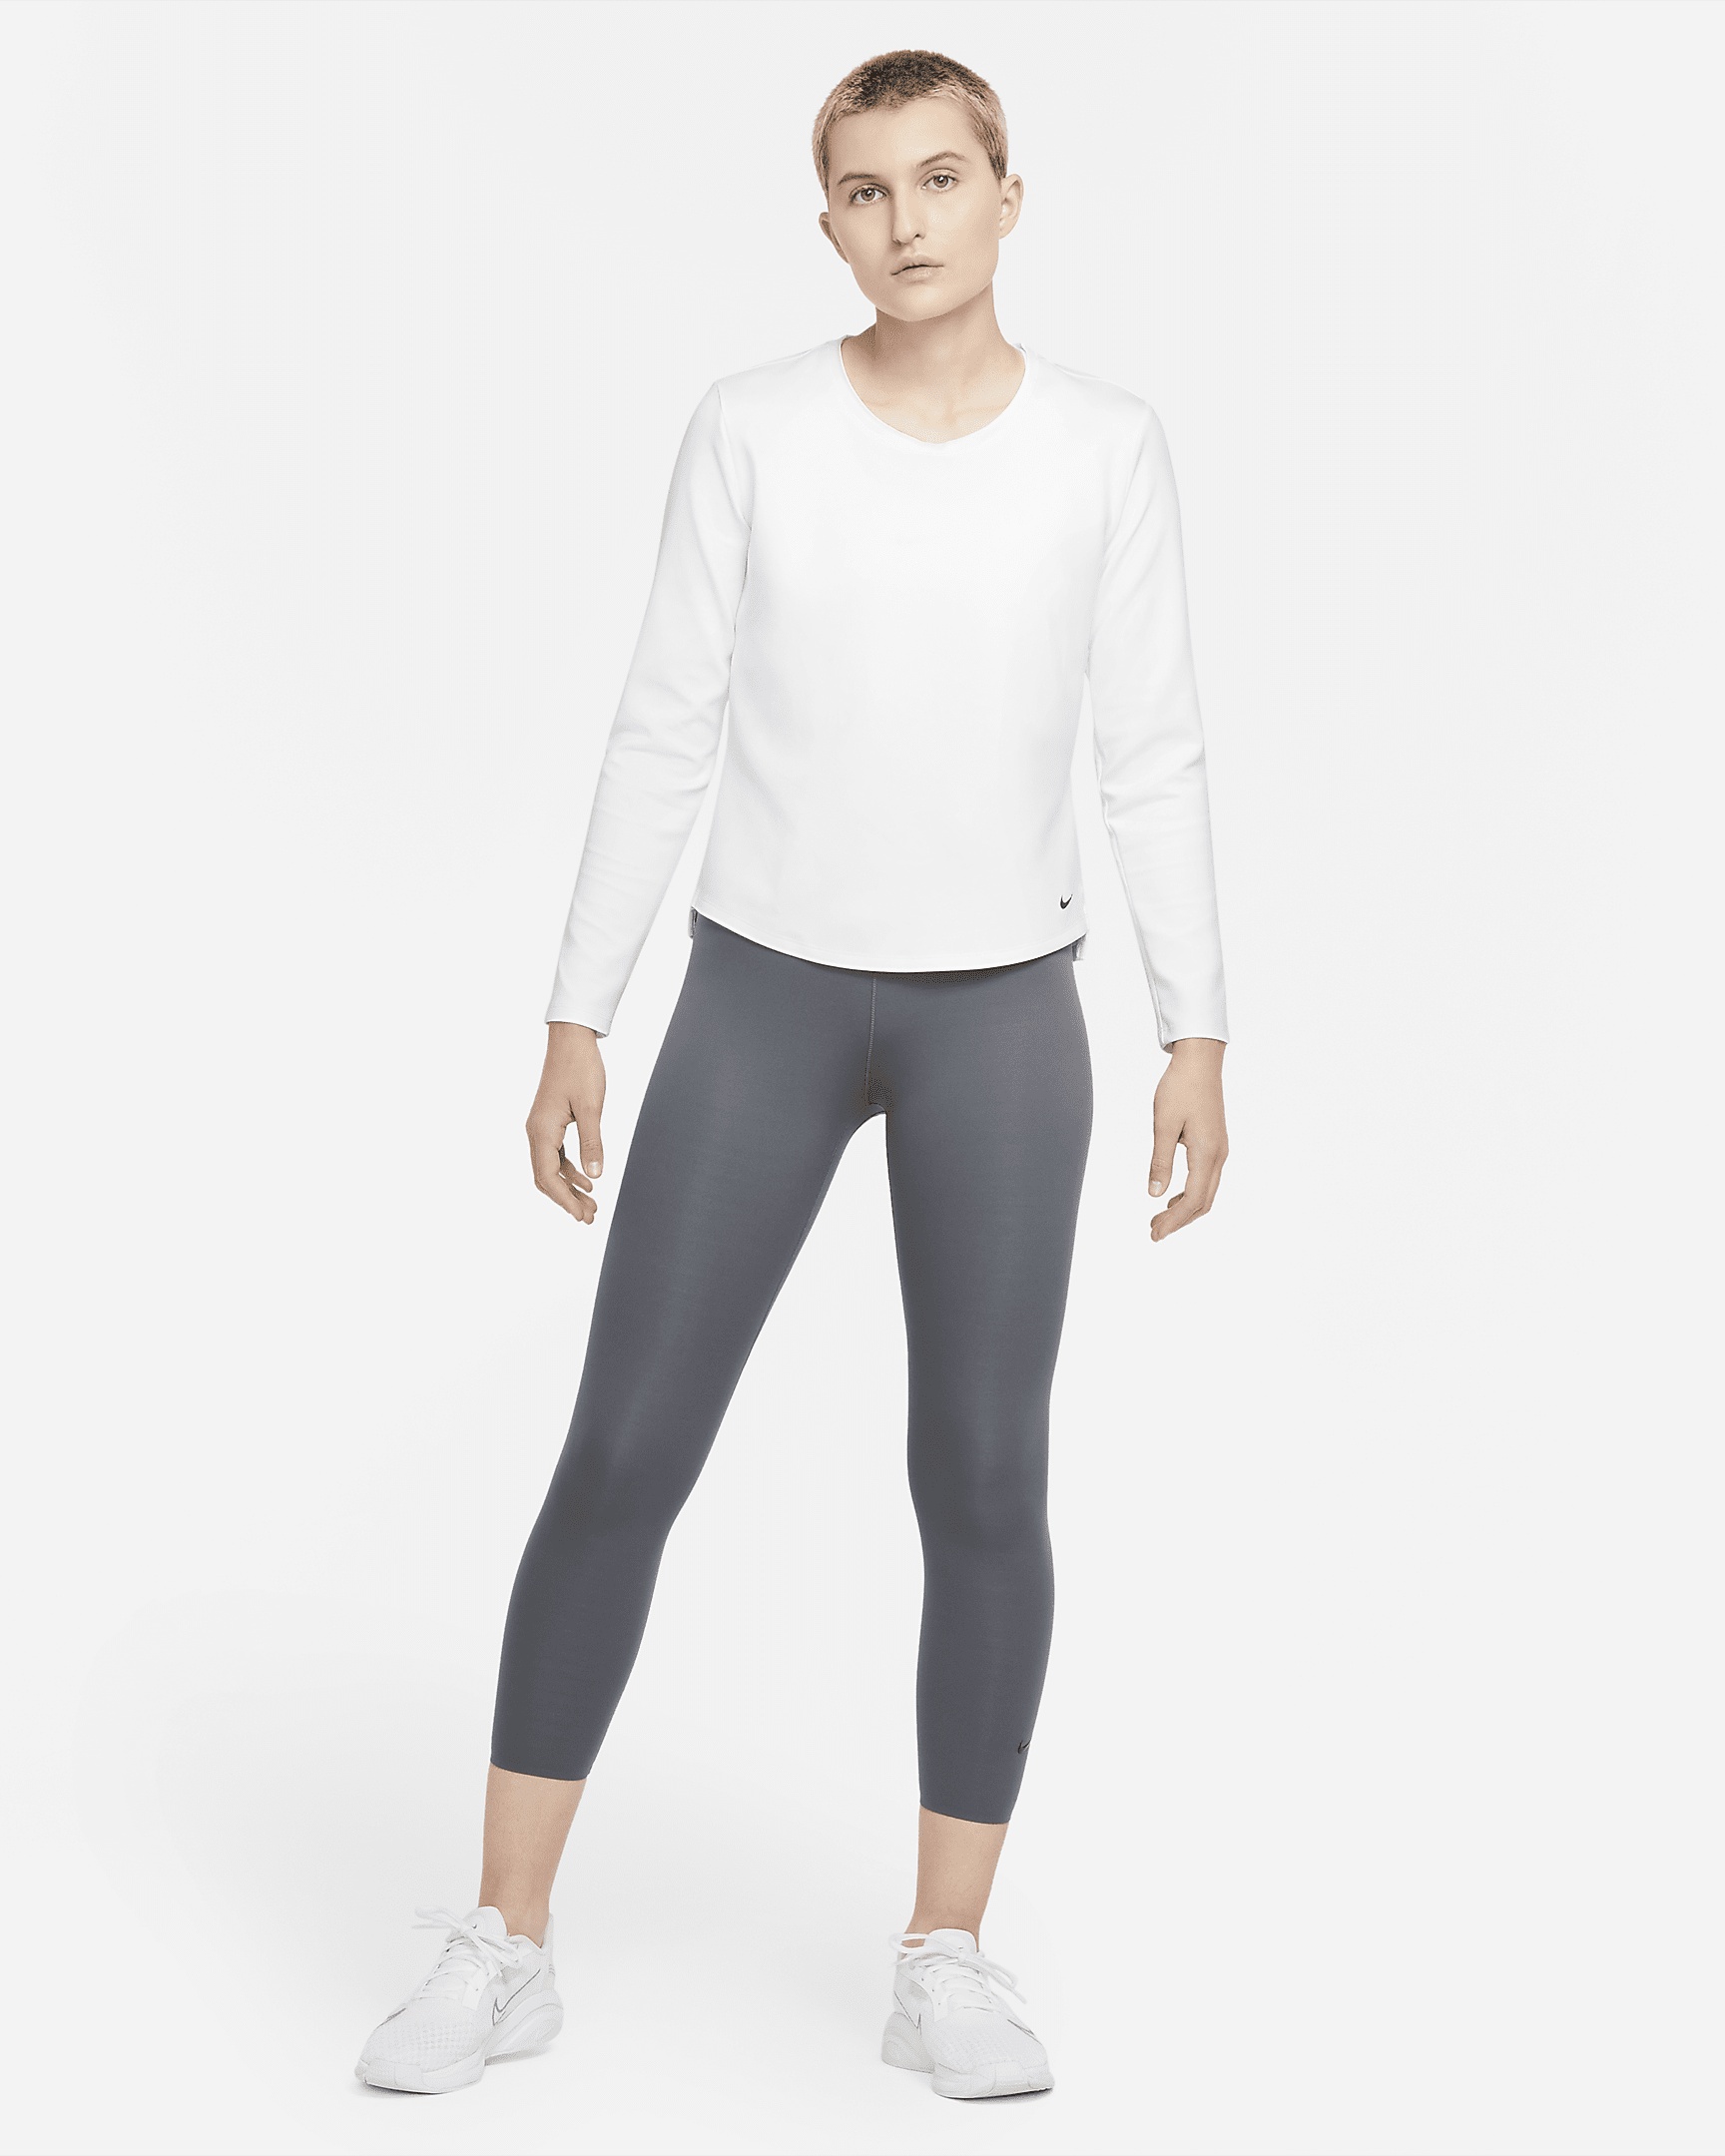 Nike Women's Therma-FIT One Long-Sleeve Top - 5